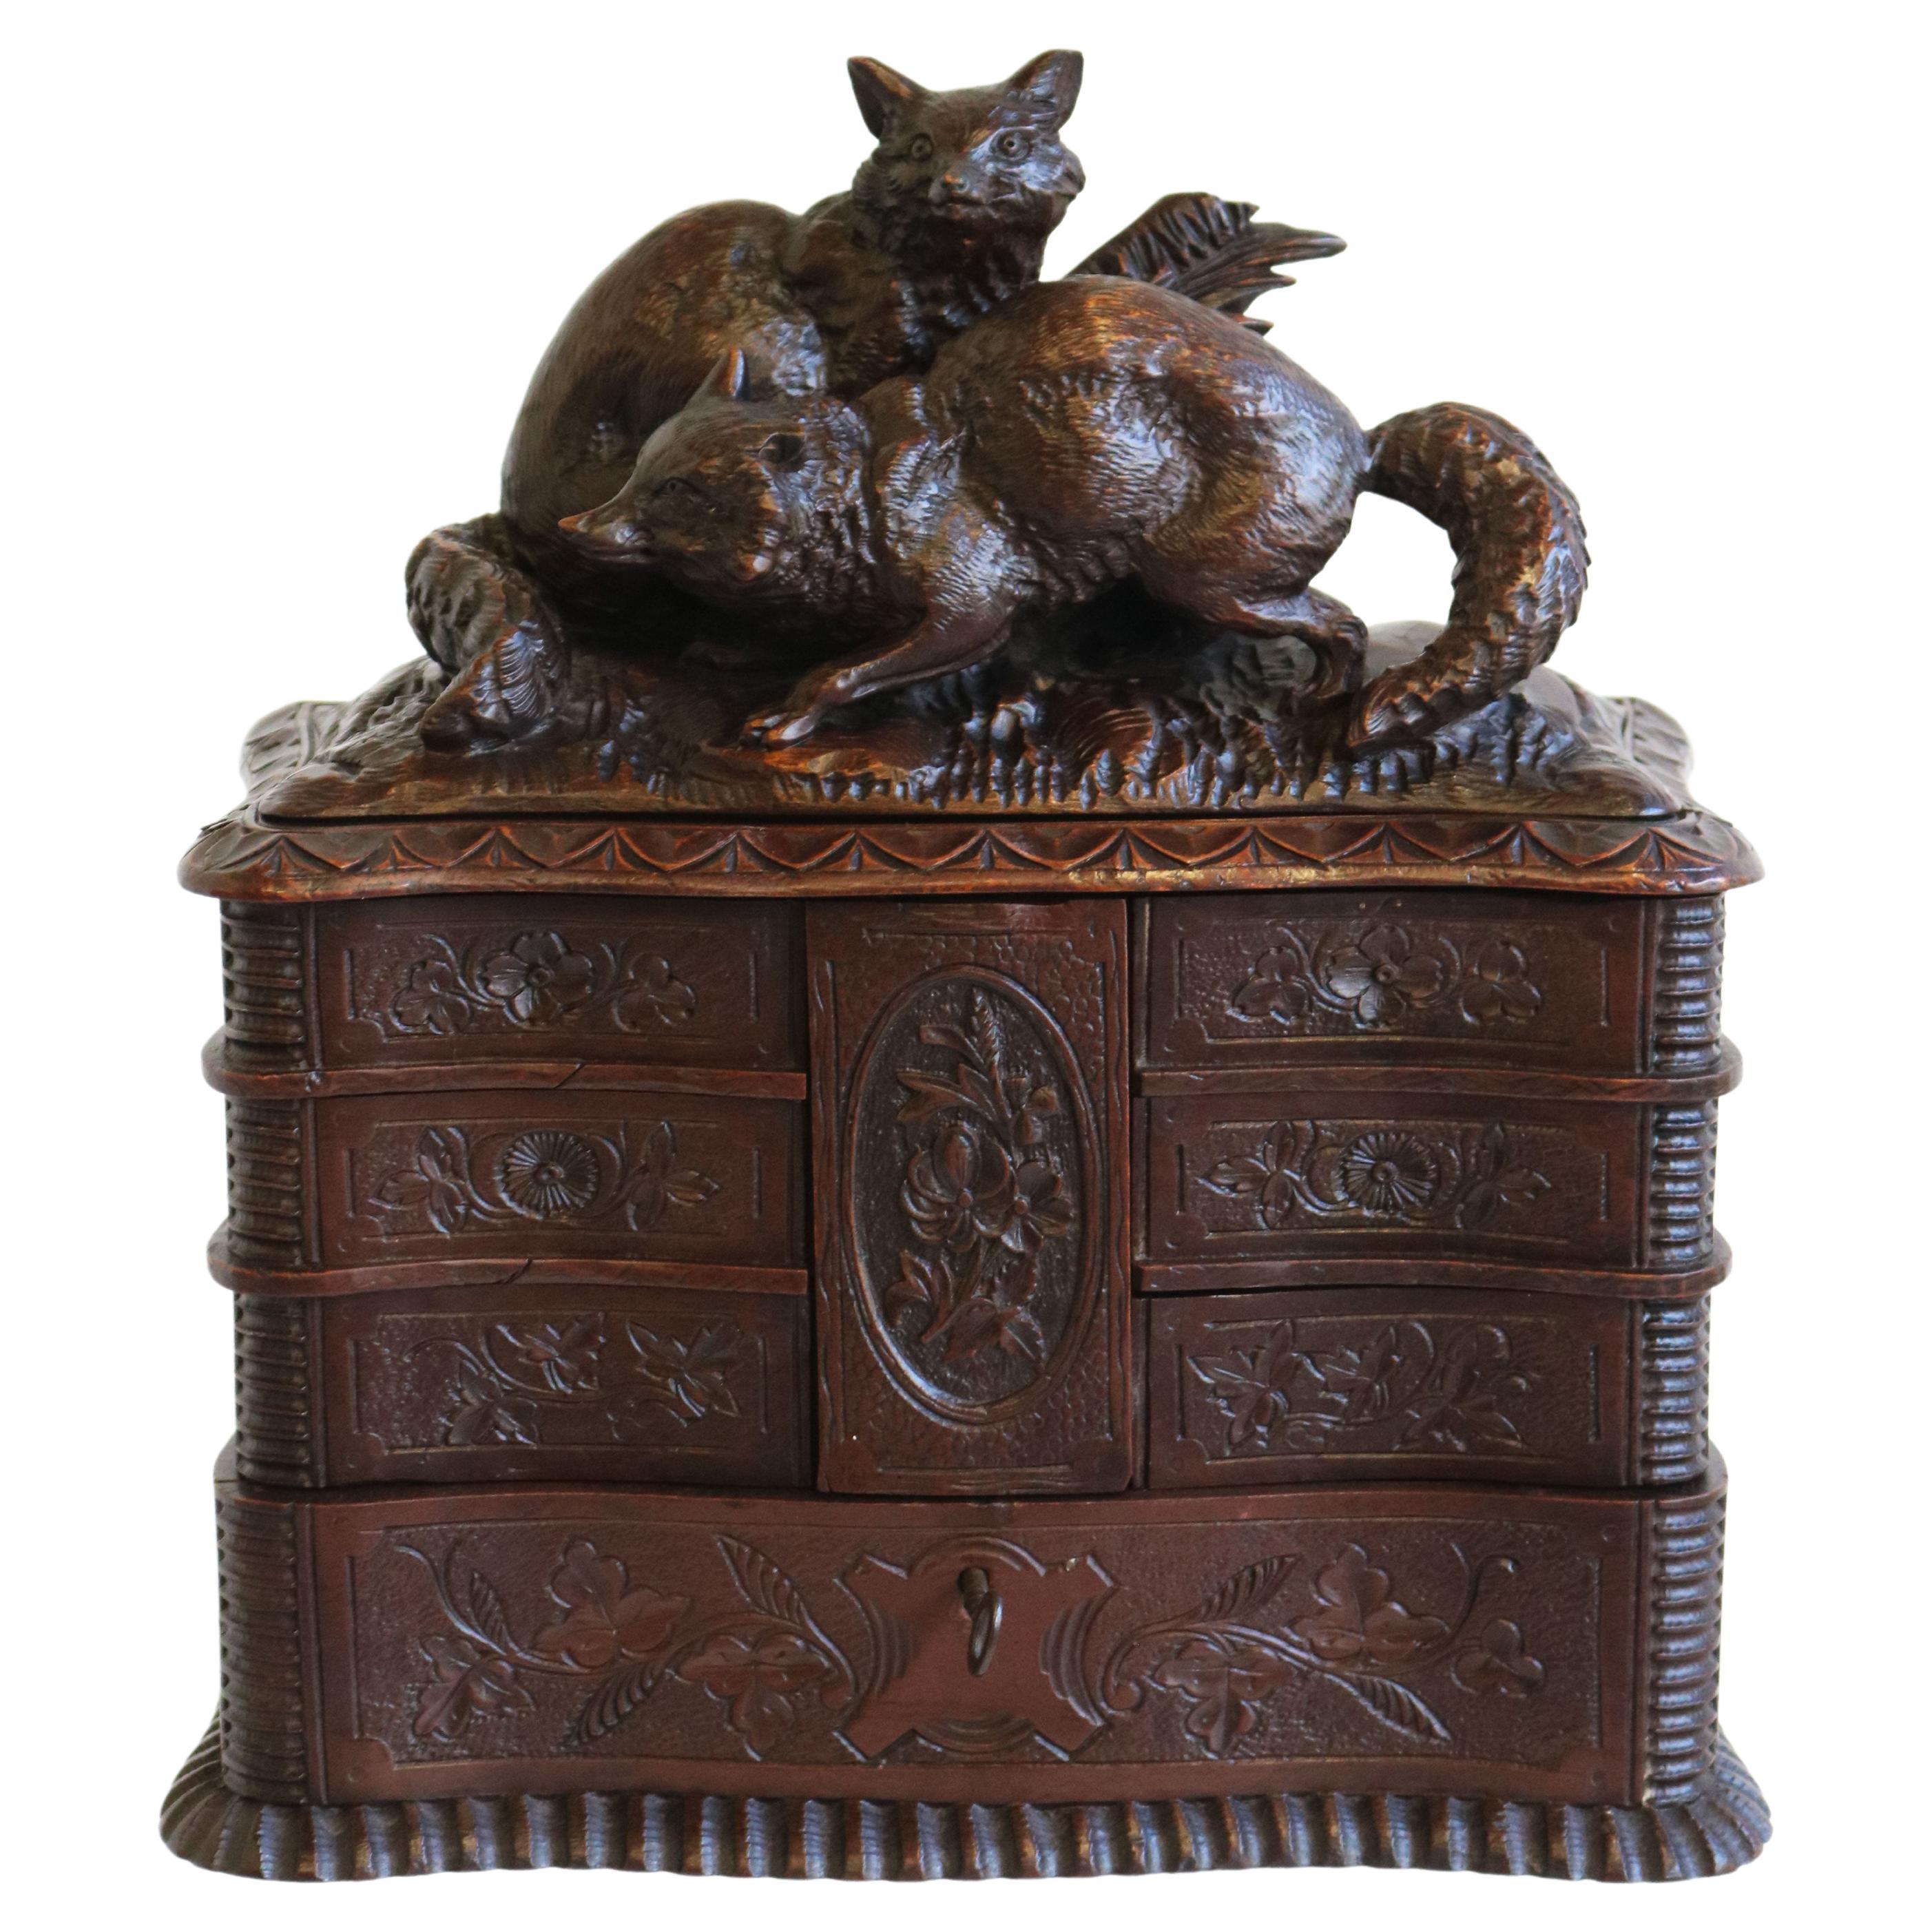 Rare Antique 4 Tier Black Forest Jewelry Box Fruitwood 19th Century Hand Carved For Sale